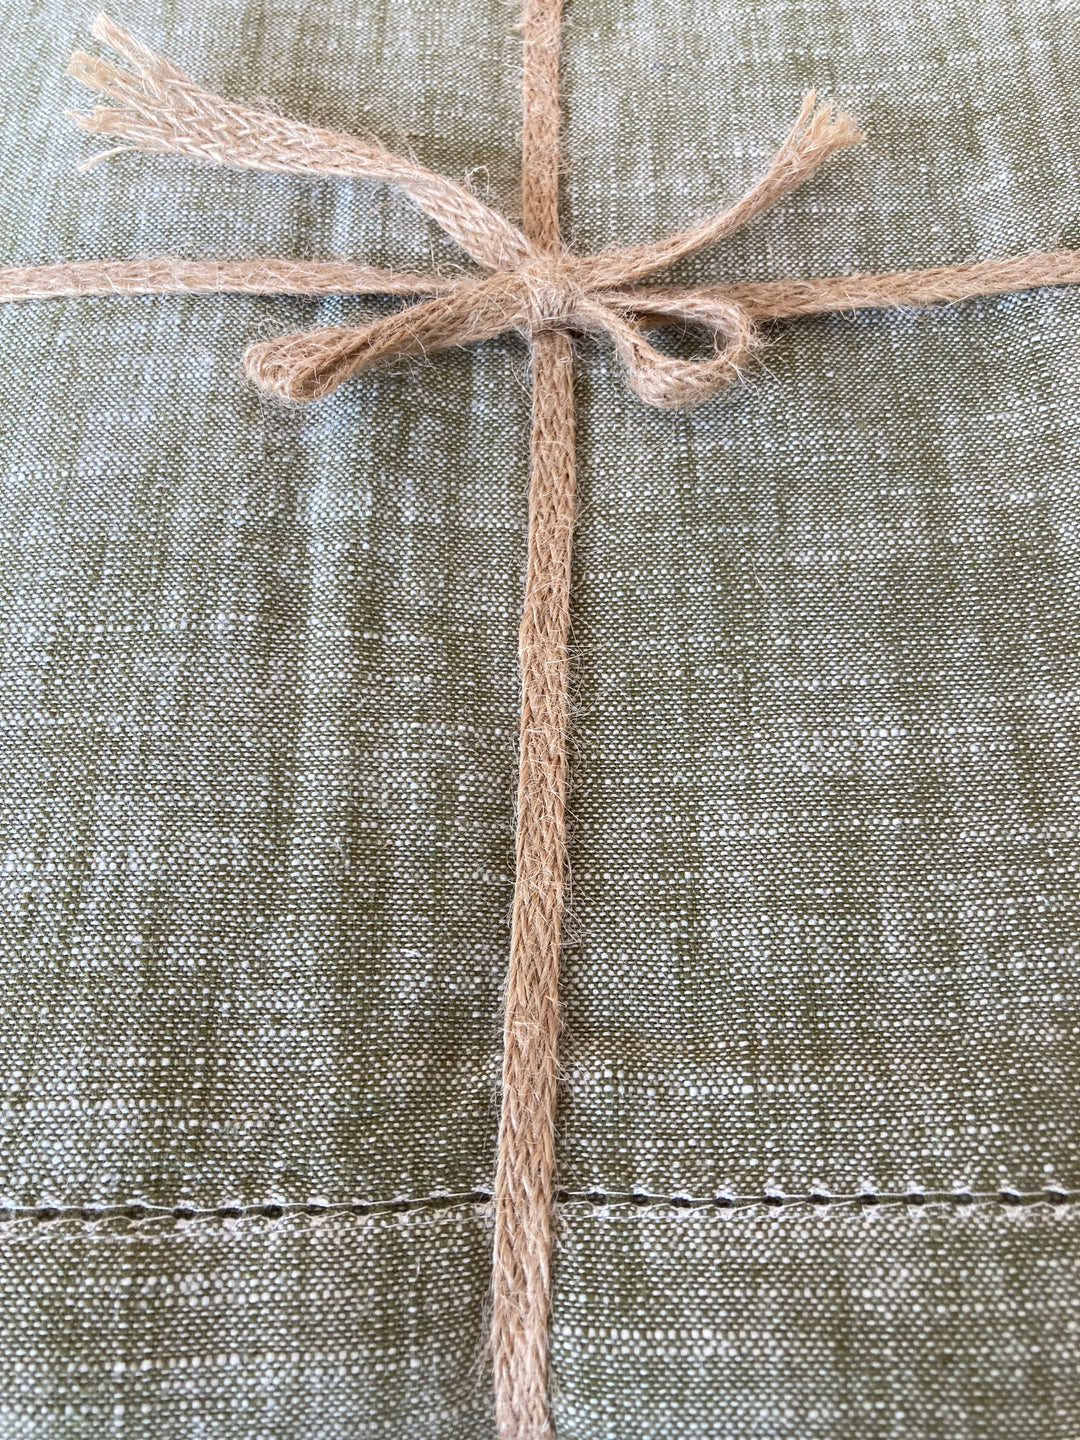 Olive green cotton tablecloth by Waltons of Yorkshire